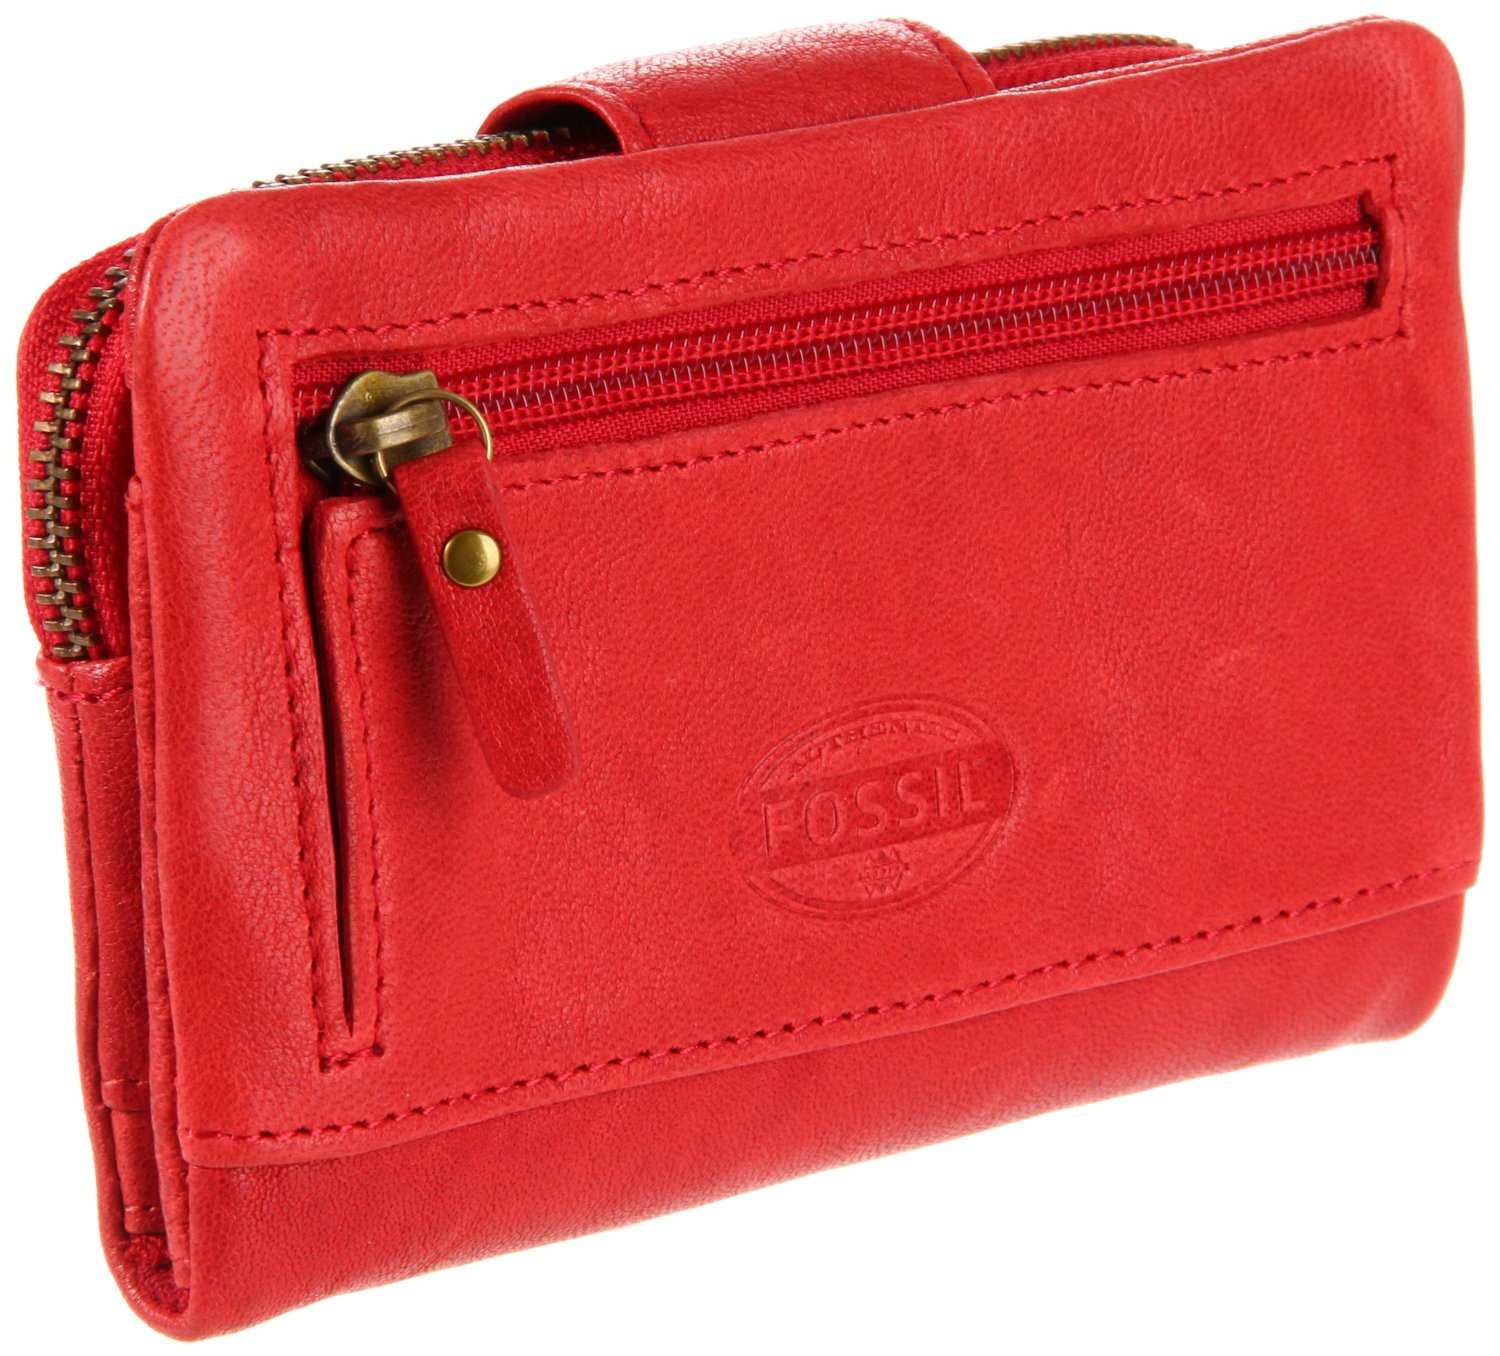 Fossil Womens Colette Wallet in Red (scarlet) | Lyst